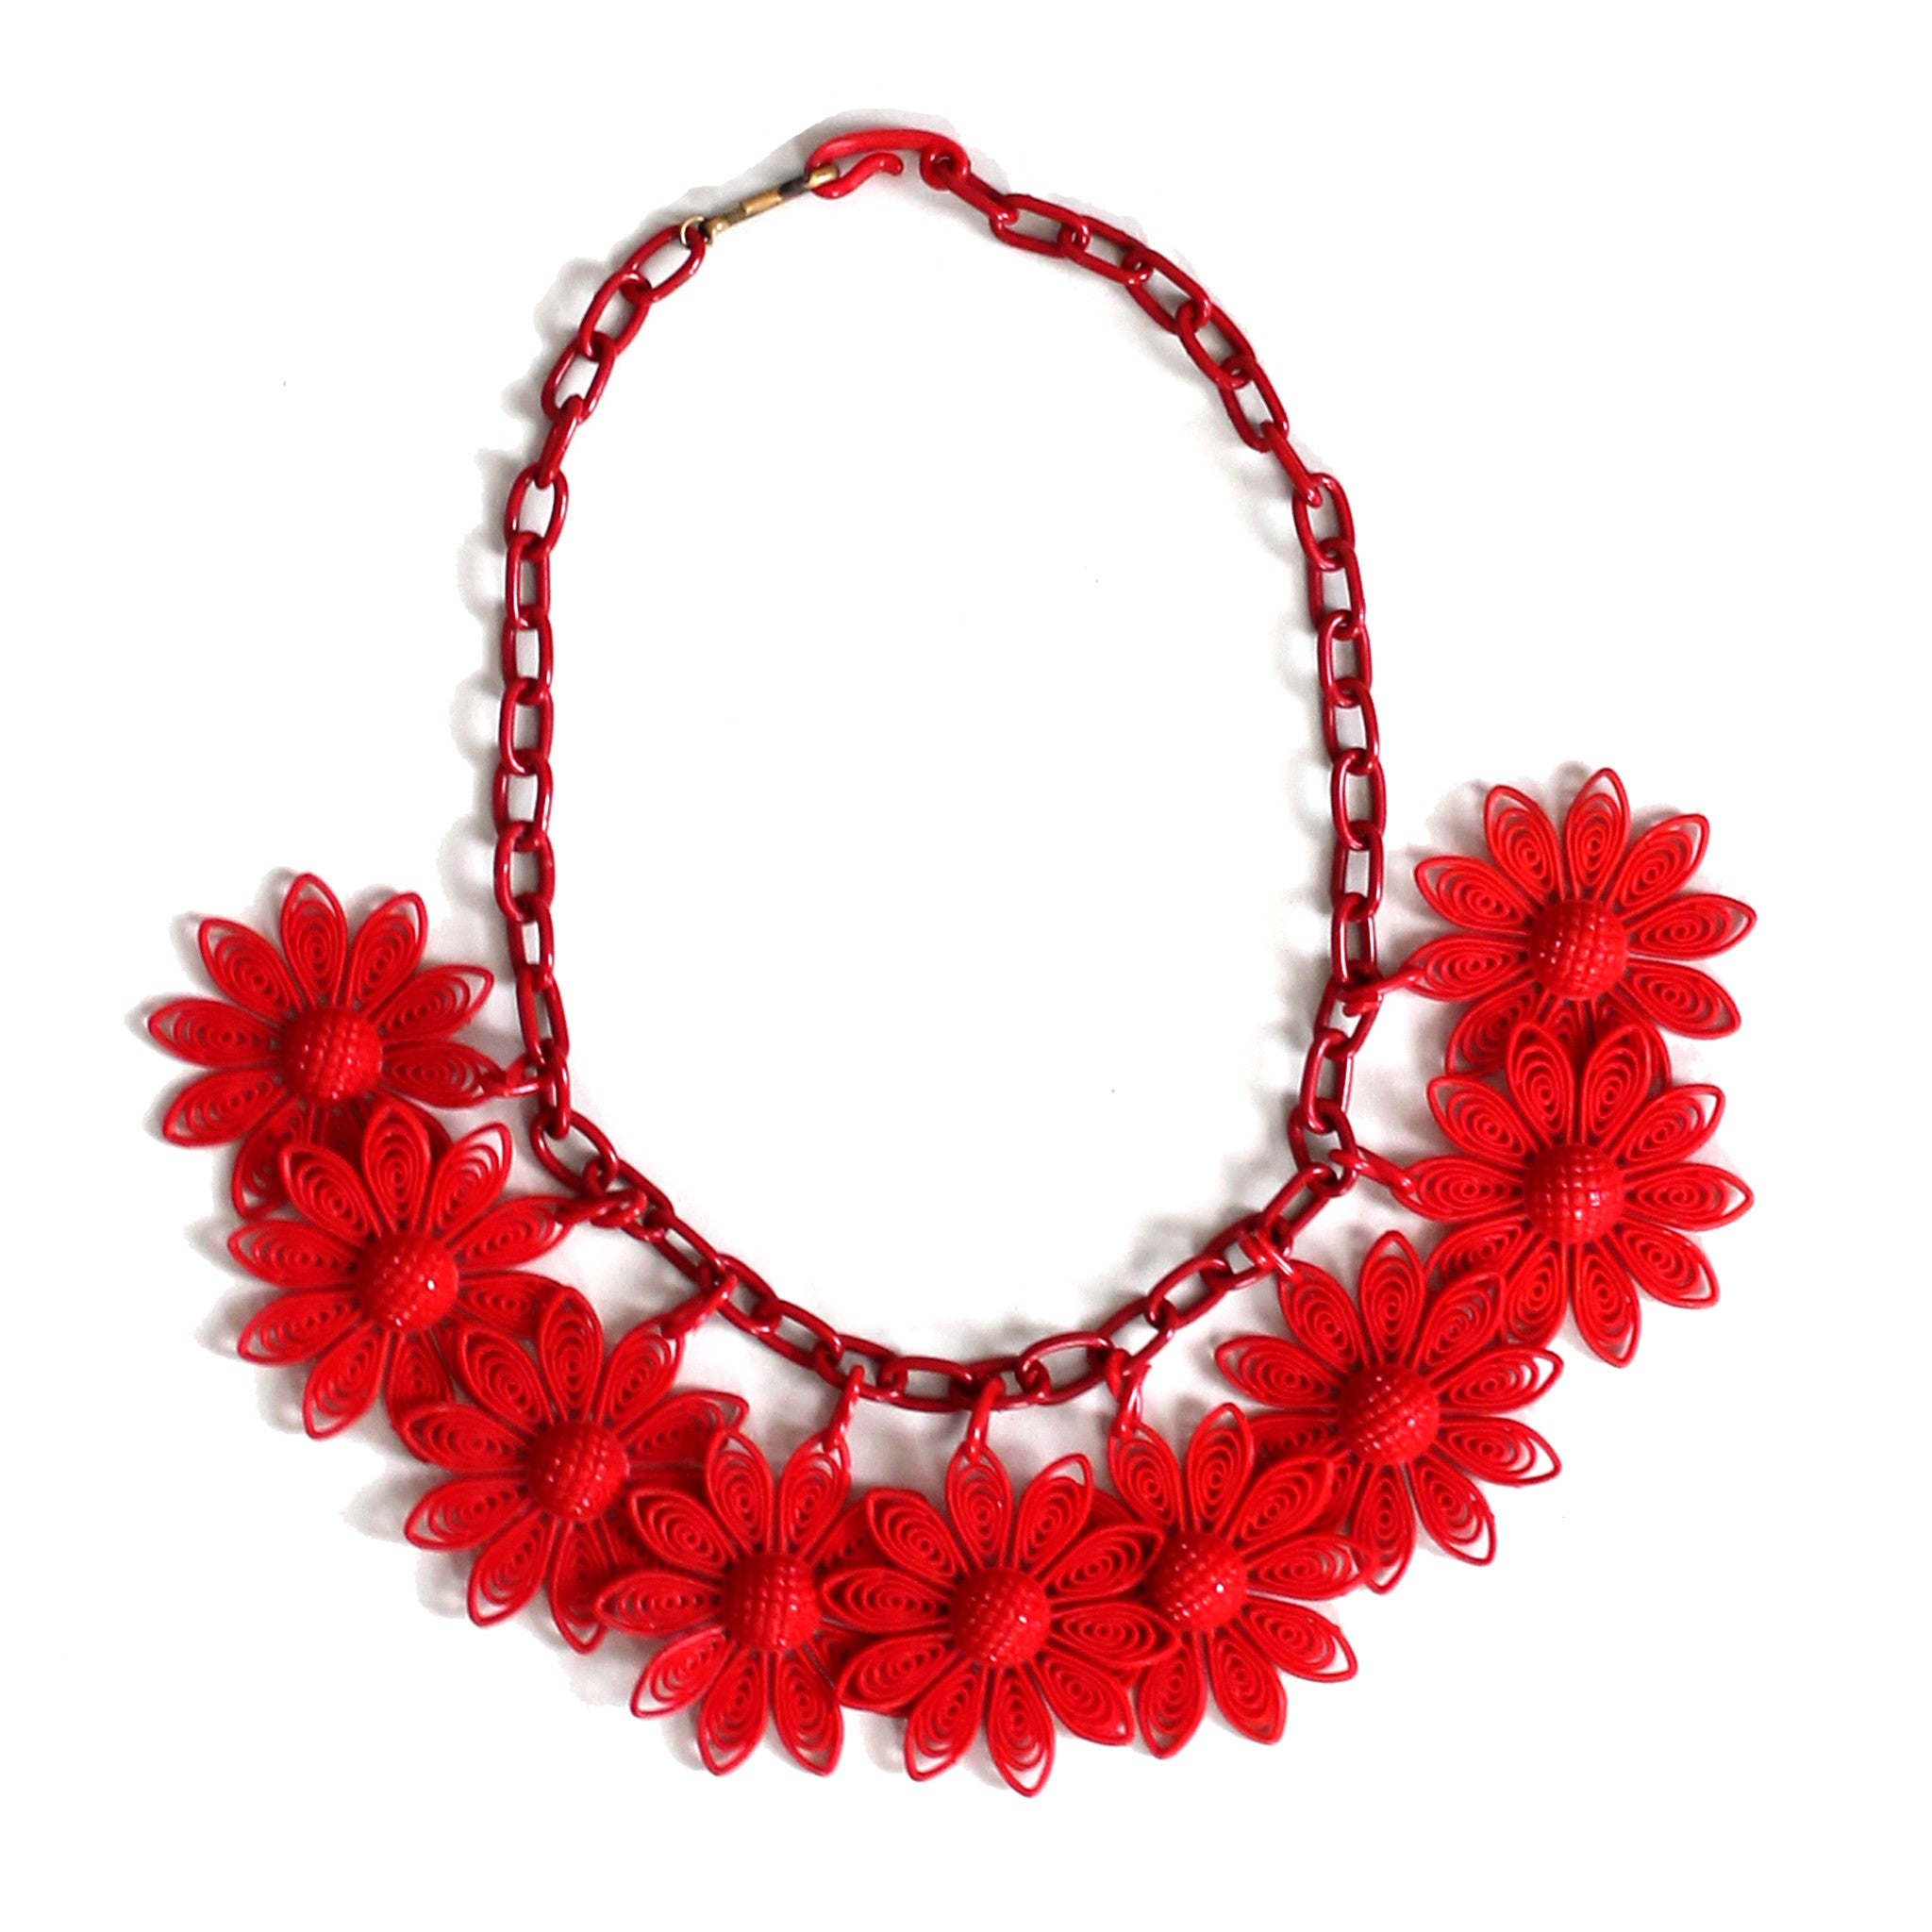 Vintage 1950s Red Daisies Plastic Necklace - Raleigh Vintage